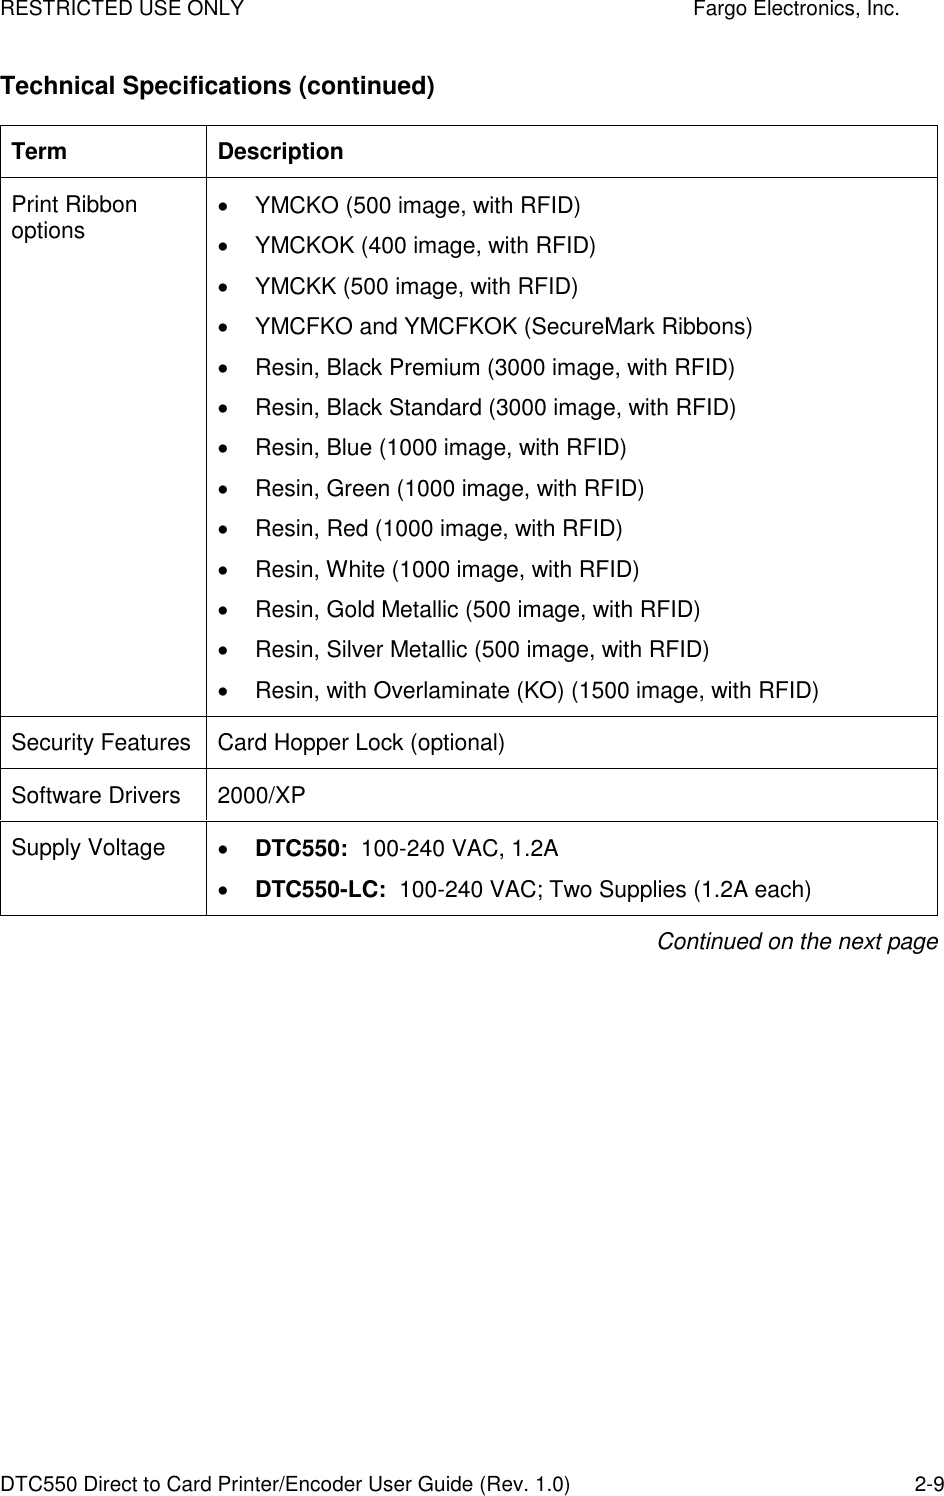 RESTRICTED USE ONLY    Fargo Electronics, Inc. DTC550 Direct to Card Printer/Encoder User Guide (Rev. 1.0)  2-9 Technical Specifications (continued) Term  Description Print Ribbon options   YMCKO (500 image, with RFID)   YMCKOK (400 image, with RFID)   YMCKK (500 image, with RFID)   YMCFKO and YMCFKOK (SecureMark Ribbons)   Resin, Black Premium (3000 image, with RFID)   Resin, Black Standard (3000 image, with RFID)   Resin, Blue (1000 image, with RFID)   Resin, Green (1000 image, with RFID)   Resin, Red (1000 image, with RFID)   Resin, White (1000 image, with RFID)   Resin, Gold Metallic (500 image, with RFID)   Resin, Silver Metallic (500 image, with RFID)   Resin, with Overlaminate (KO) (1500 image, with RFID) Security Features  Card Hopper Lock (optional)  Software Drivers  2000/XP Supply Voltage   DTC550:  100-240 VAC, 1.2A  DTC550-LC:  100-240 VAC; Two Supplies (1.2A each) Continued on the next page 